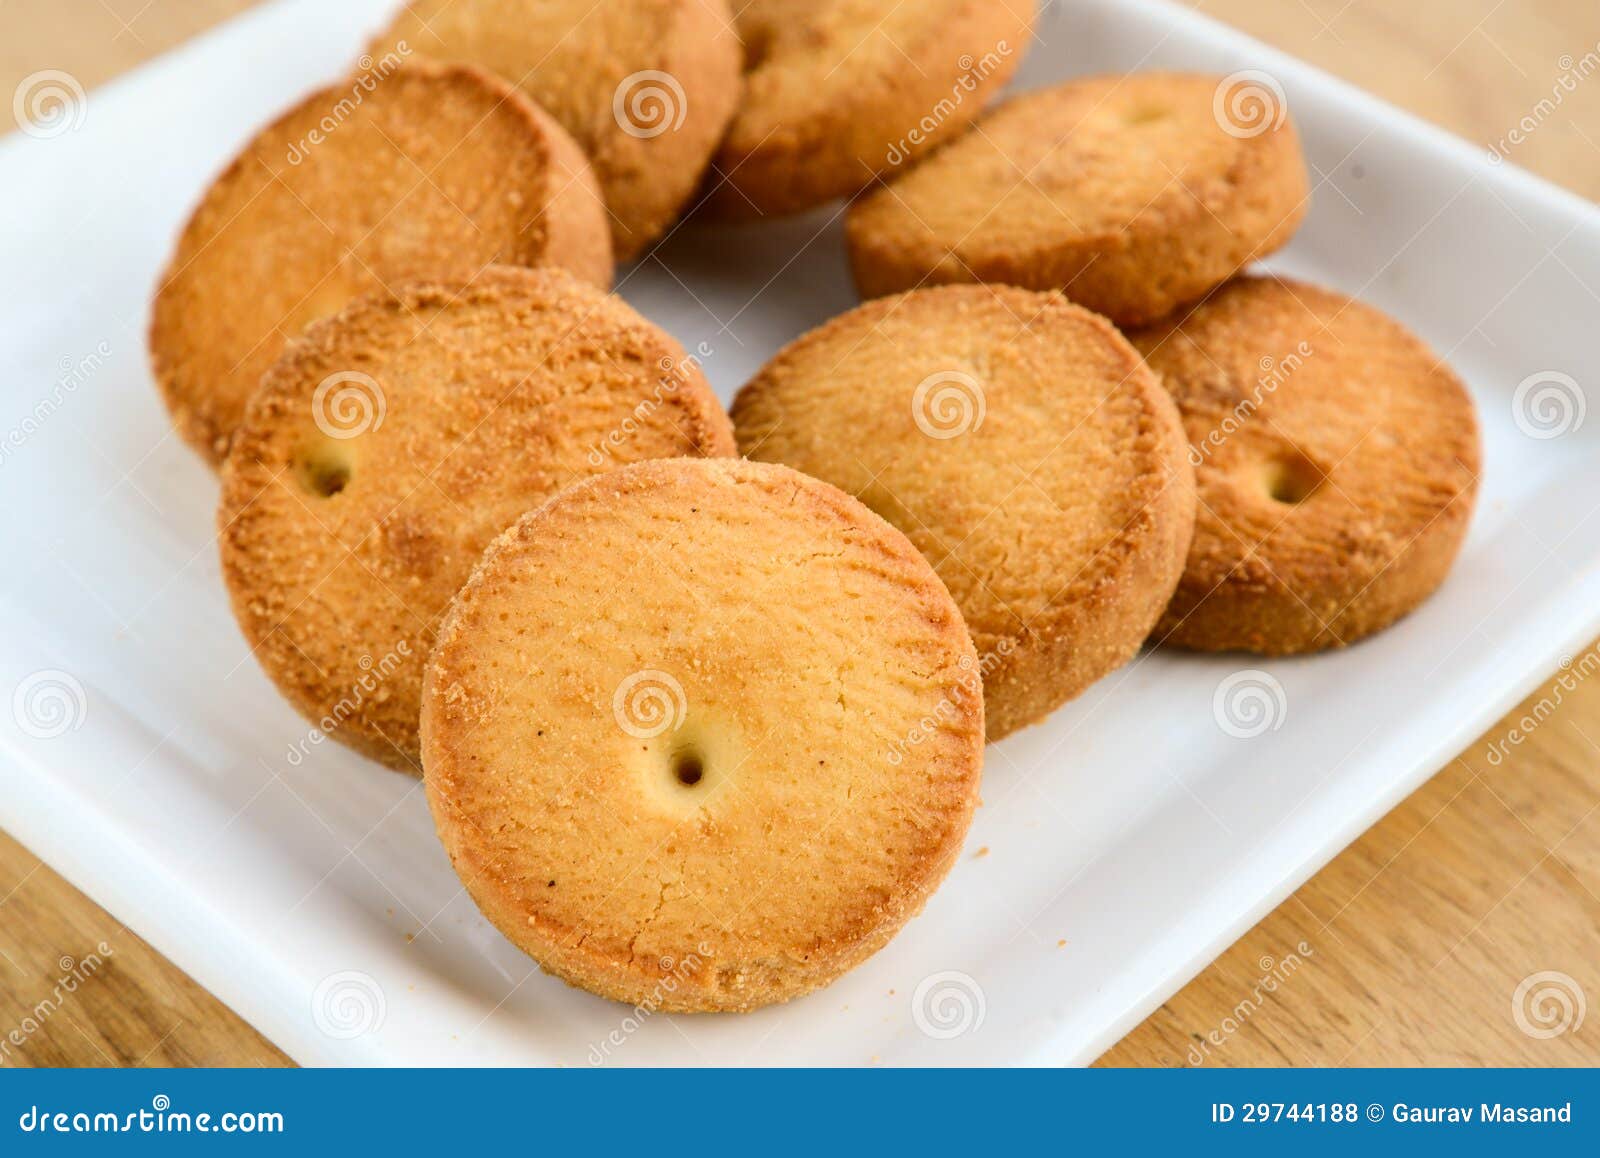 osmania biscuits